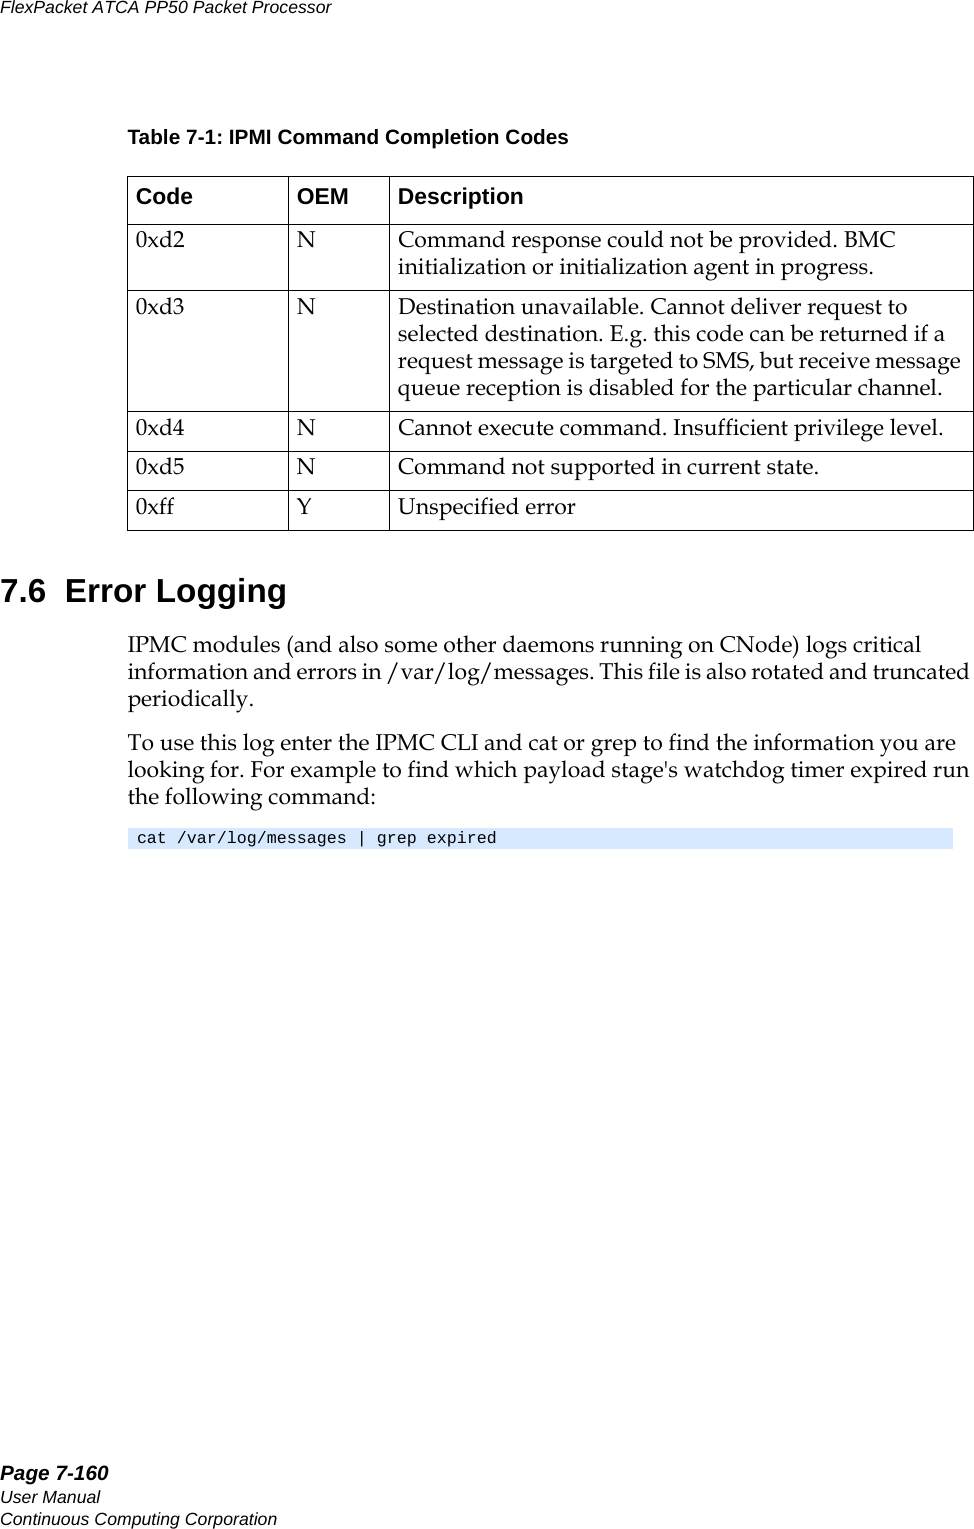 Page 7-160User ManualContinuous Computing CorporationFlexPacket ATCA PP50 Packet Processor     Preliminary7.6  Error LoggingIPMC modules (and also some other daemons running on CNode) logs critical information and errors in /var/log/messages. This file is also rotated and truncated periodically.To use this log enter the IPMC CLI and cat or grep to find the information you are looking for. For example to find which payload stage&apos;s watchdog timer expired run the following command:0xd2 N Command response could not be provided. BMC initialization or initialization agent in progress. 0xd3 N Destination unavailable. Cannot deliver request to selected destination. E.g. this code can be returned if a request message is targeted to SMS, but receive message queue reception is disabled for the particular channel. 0xd4 N Cannot execute command. Insufficient privilege level.0xd5 N Command not supported in current state.0xff Y Unspecified errorcat /var/log/messages | grep expiredTable 7-1: IPMI Command Completion Codes Code OEM Description